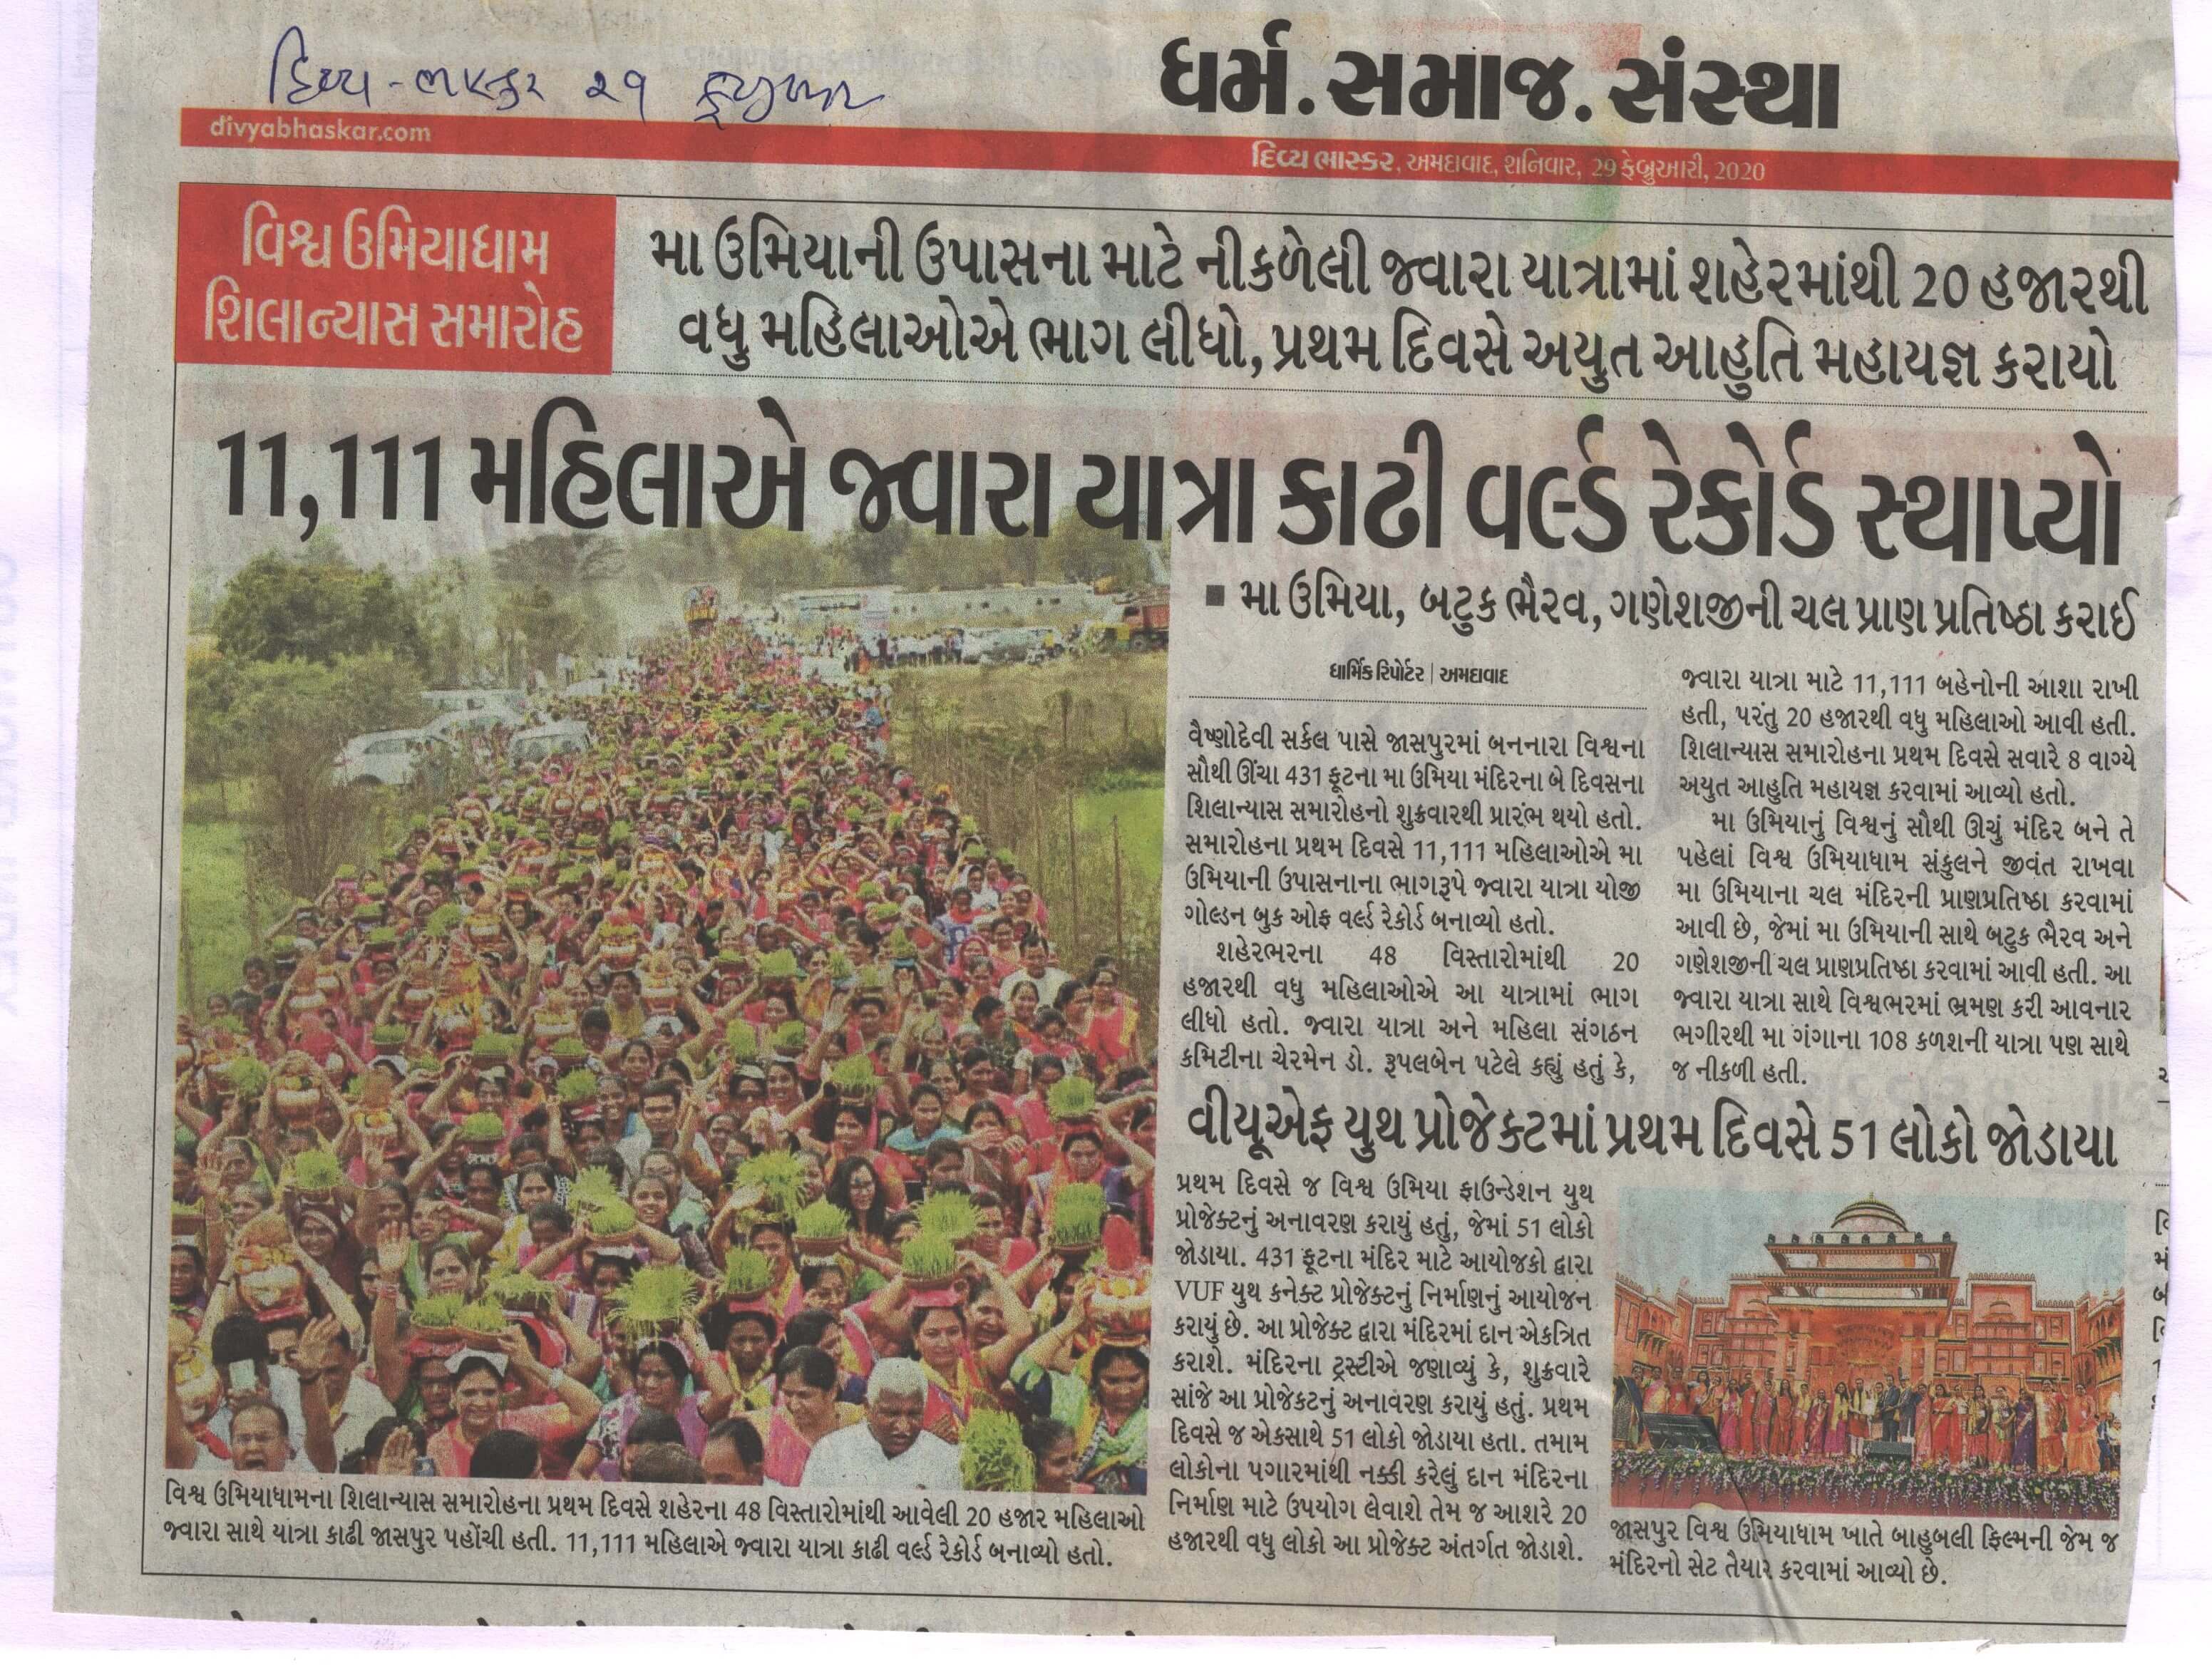 A world record was set by 11,111 women who performed jawara Yatra